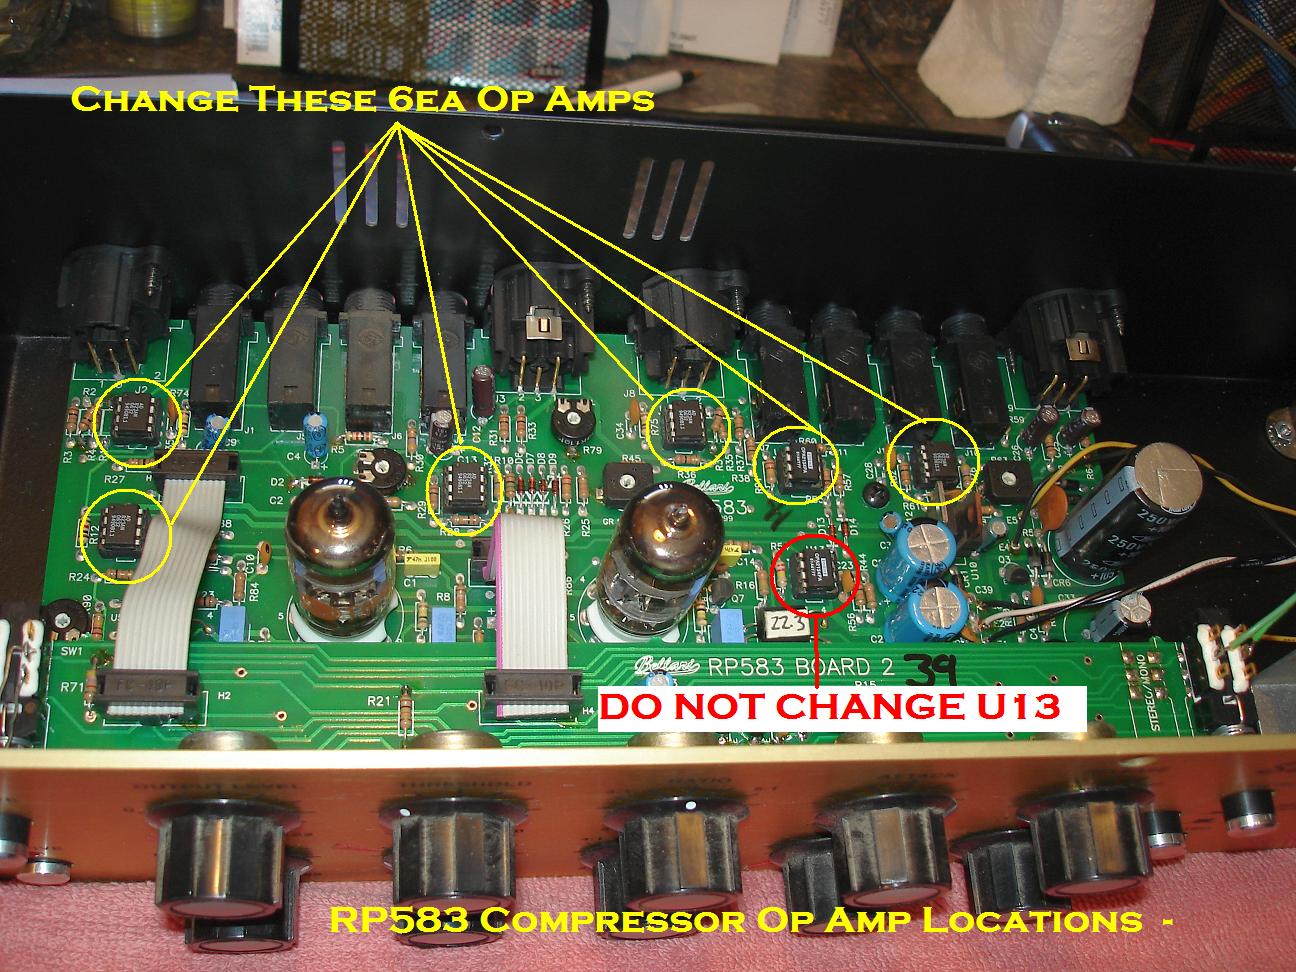 This is the Op Amp locations for the RP-583. Their marked in yellow.